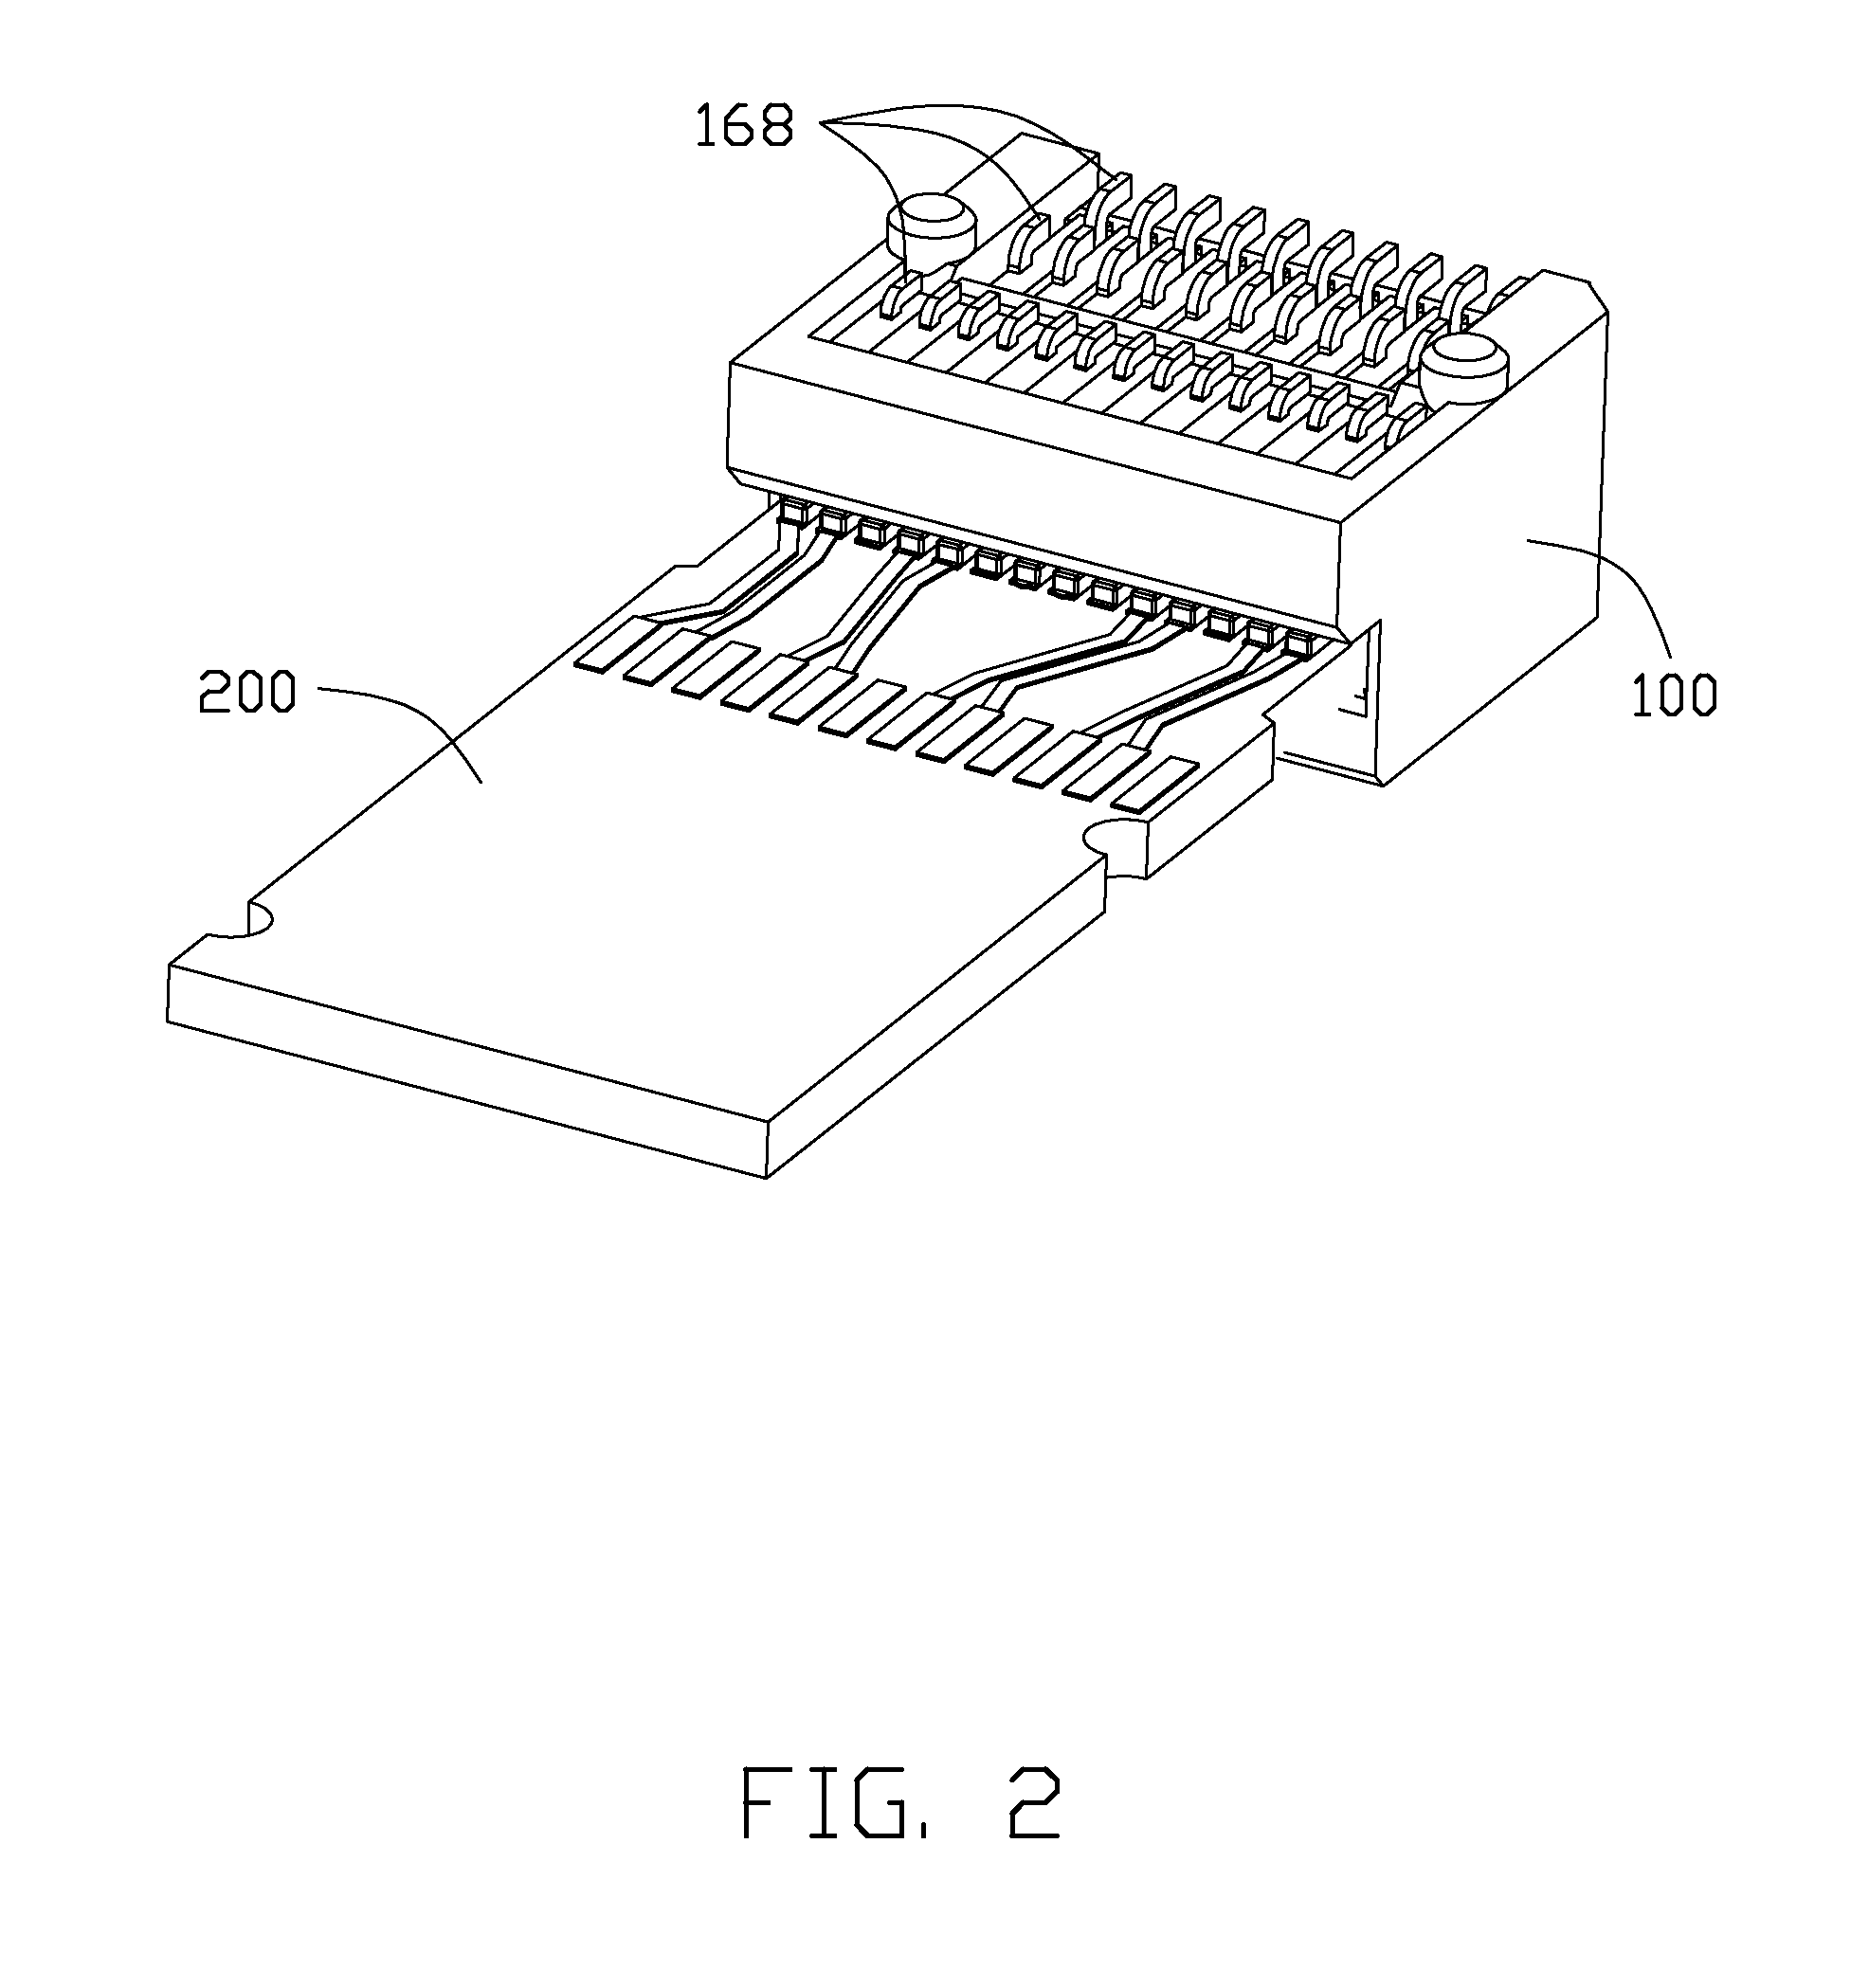 Receptacle connector having contact modules and plug connector having a paddle board